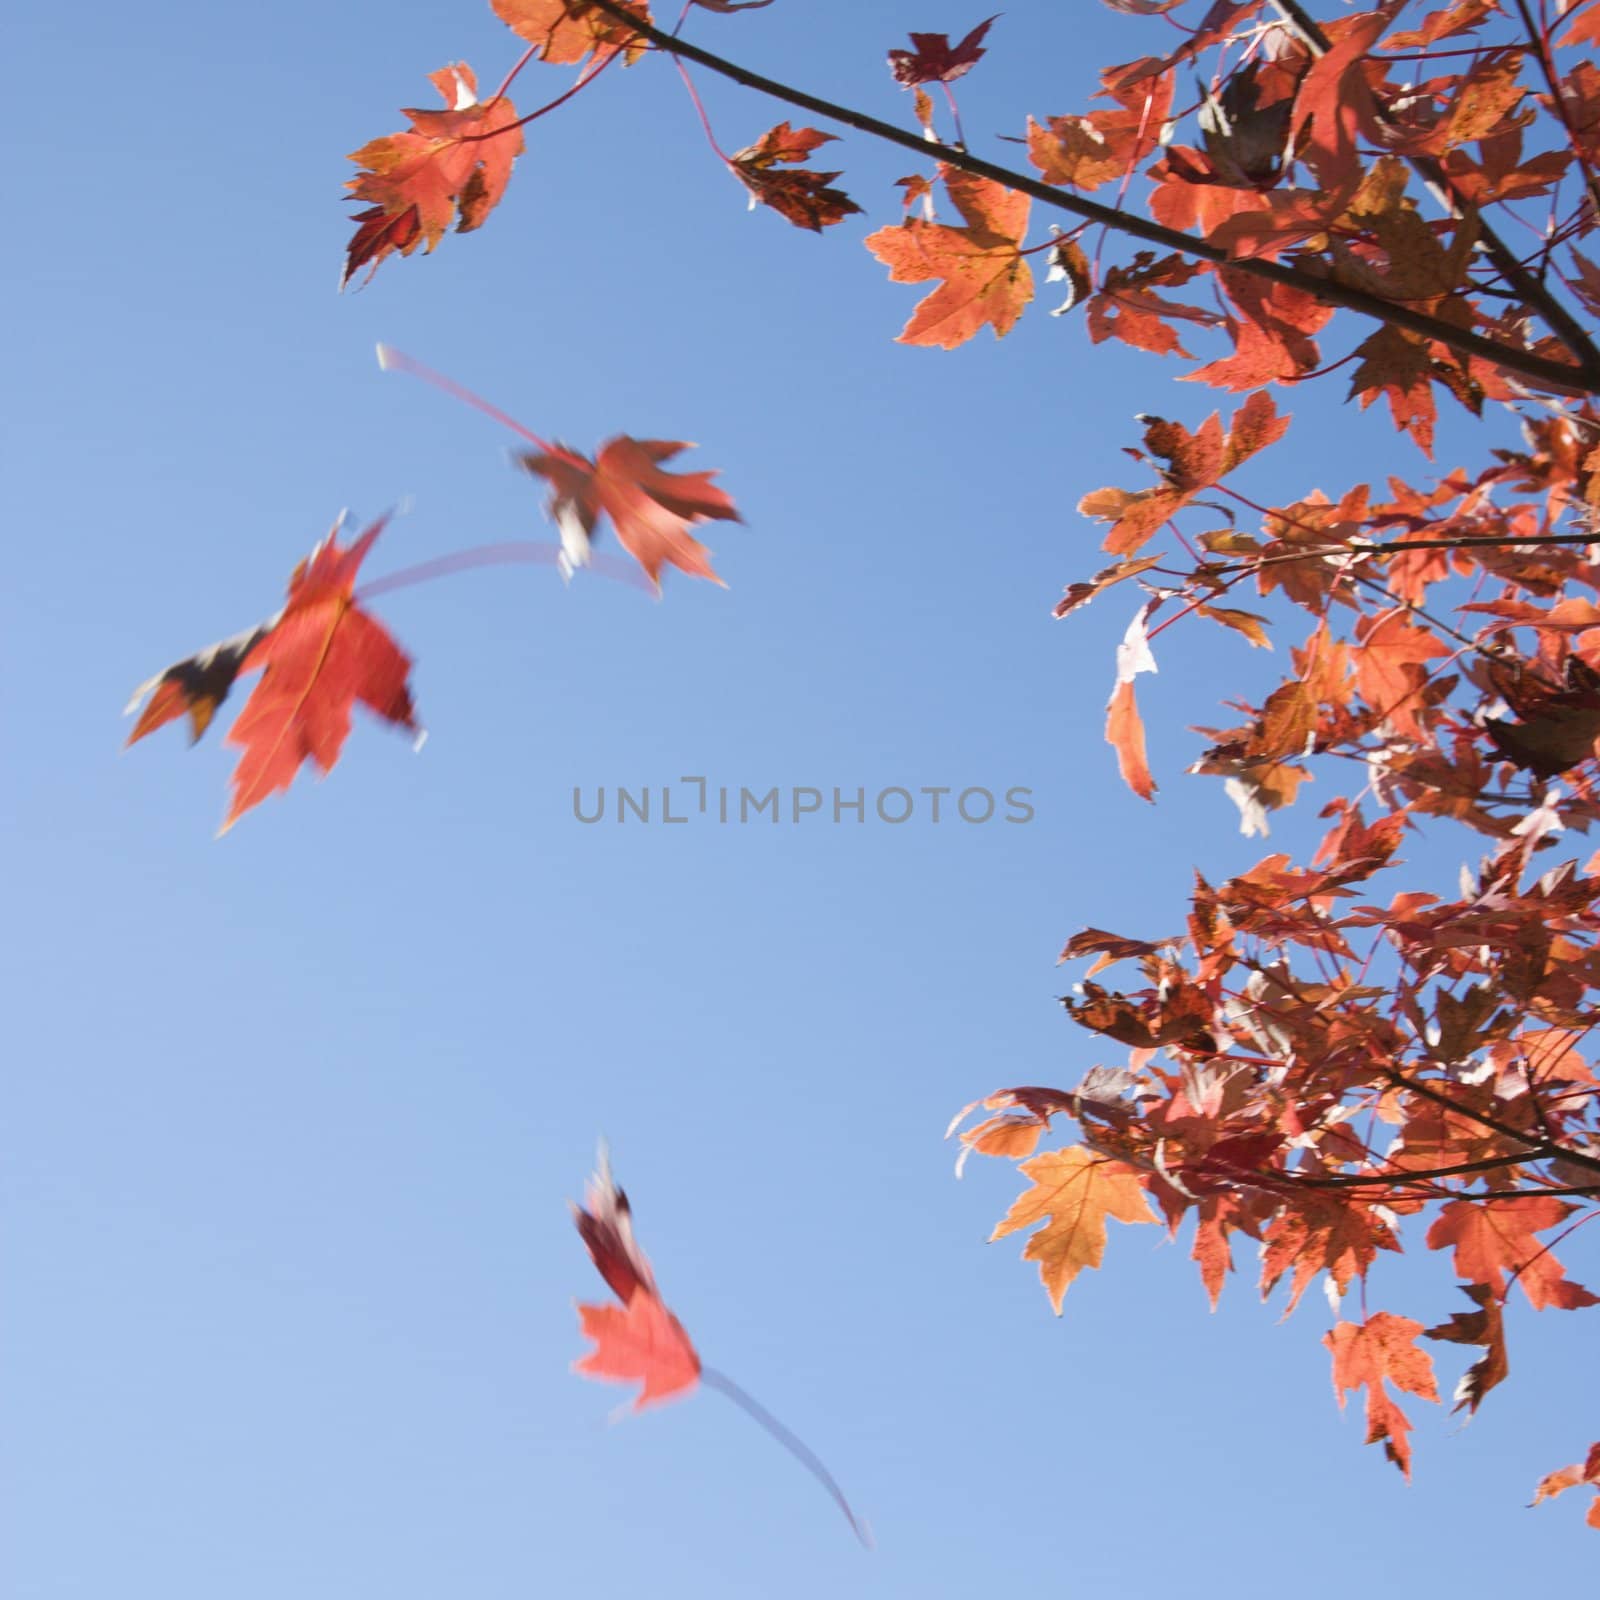 Red autumn maple leaves falling from tree with blue sky as background.